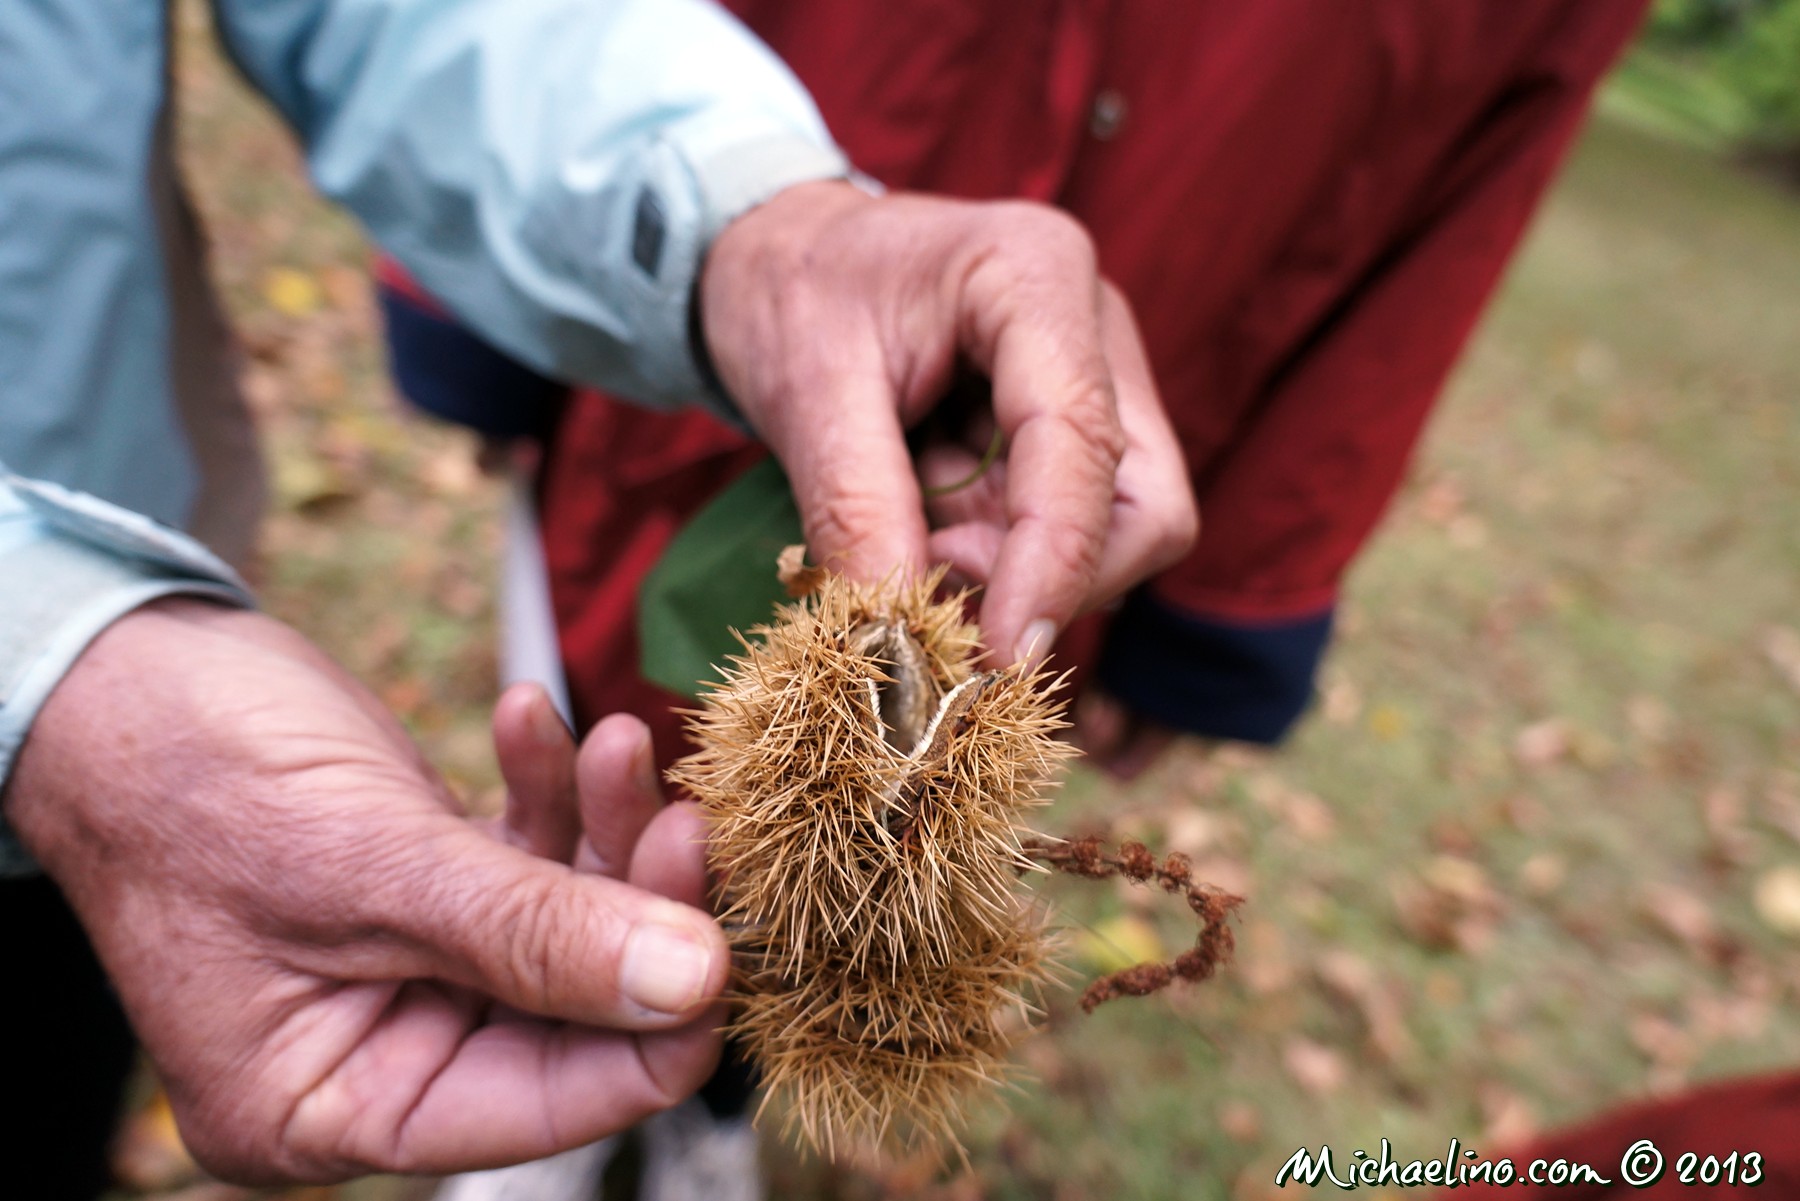 The husk of the American Chestnut